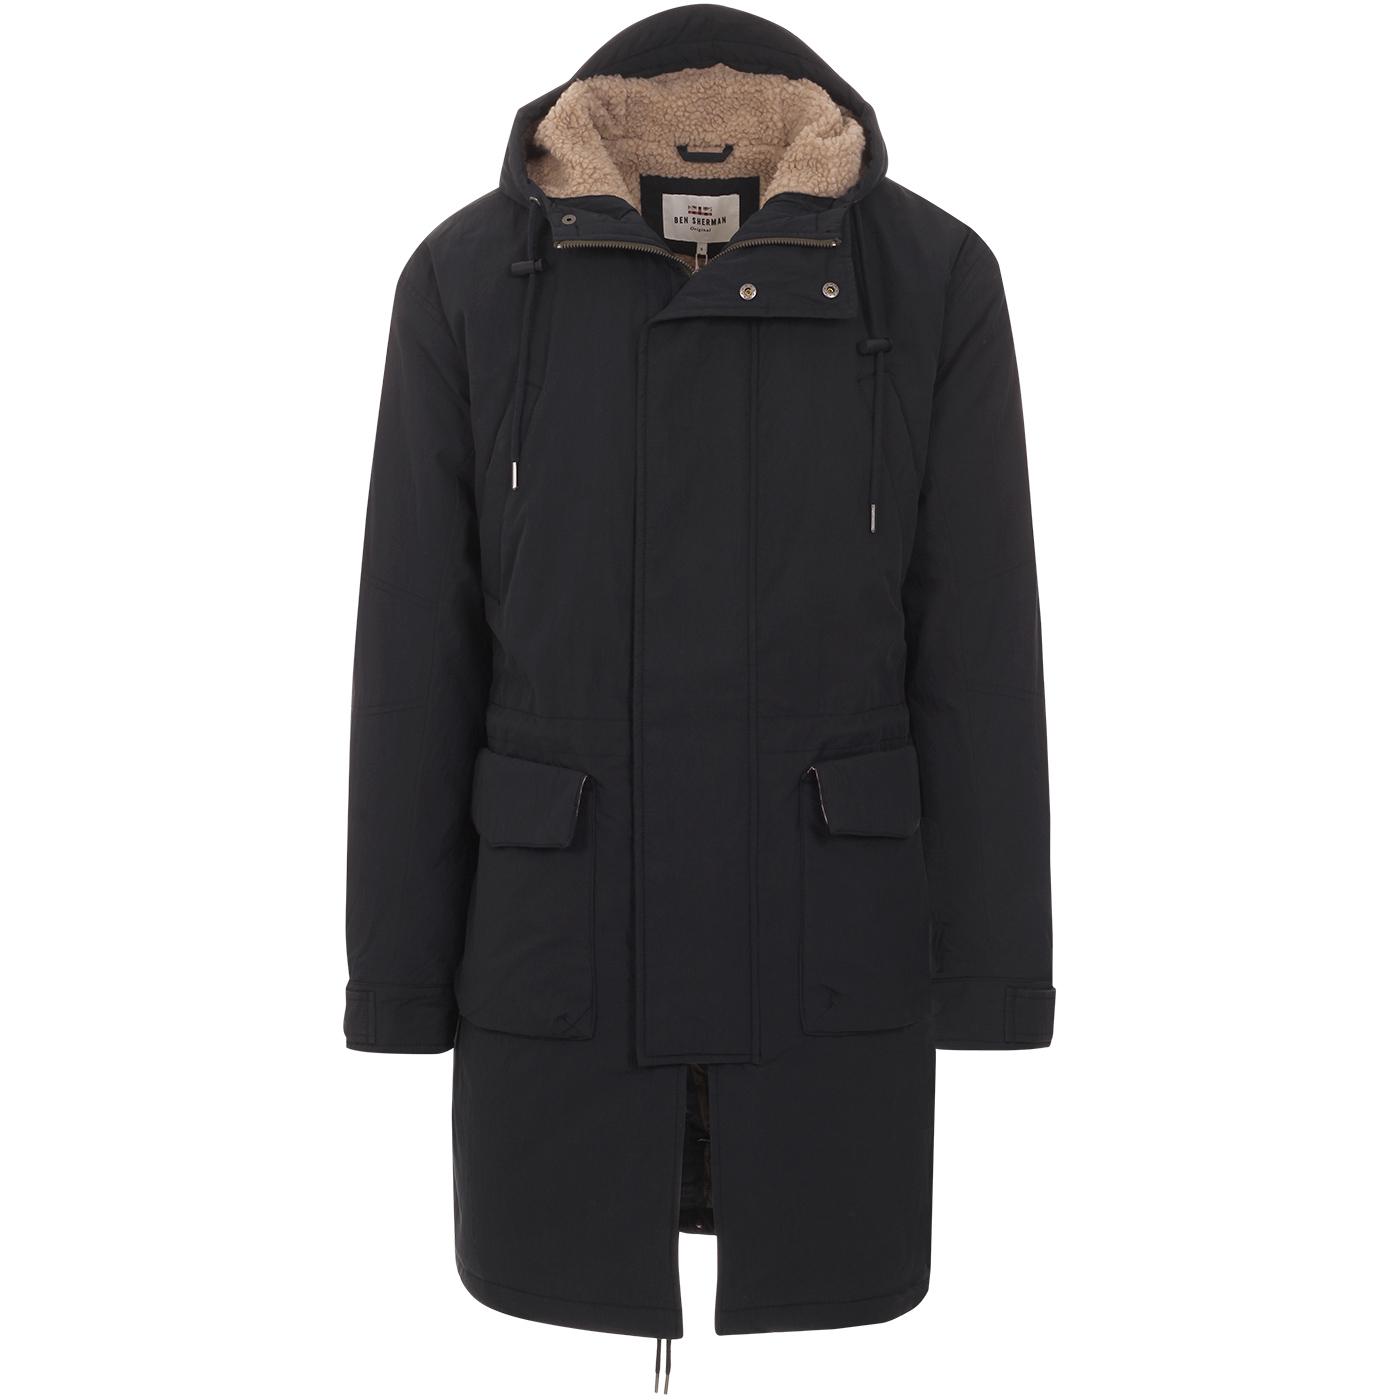 BEN SHERMAN Mod Quilted Fishtail Parka Jacket in Midnight